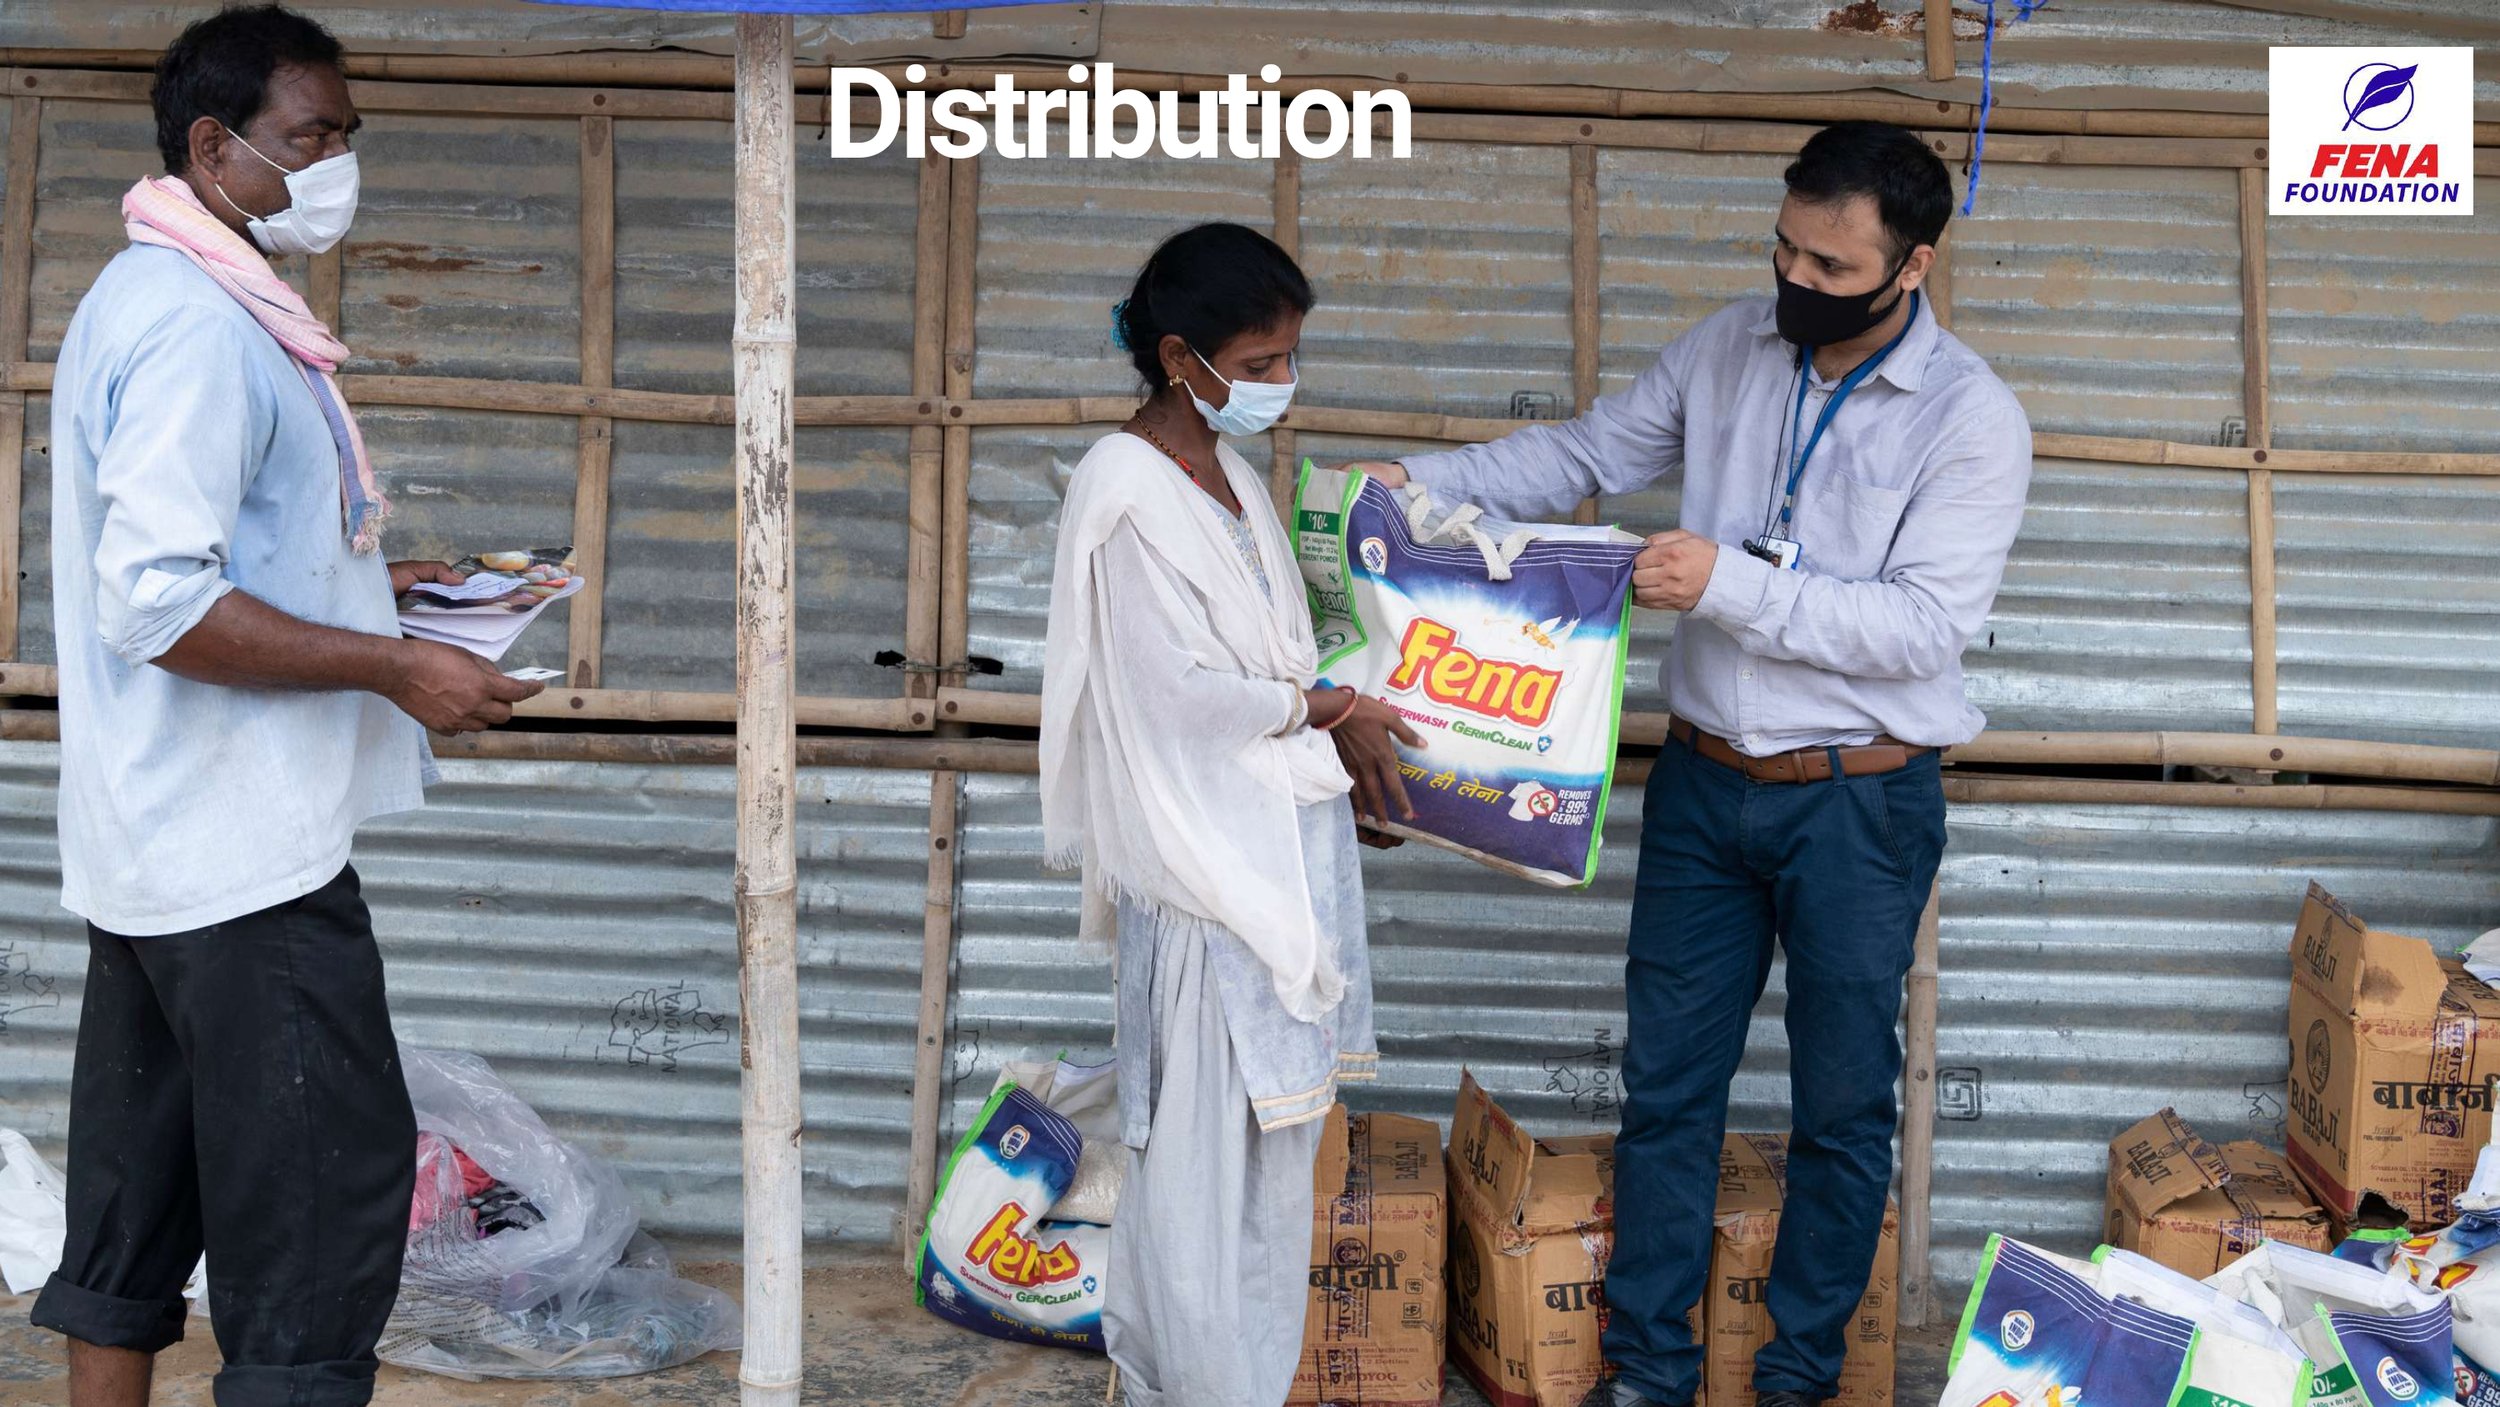 Ration+kits+Distribution+by+Fena+Foundation+_compressed_page-0006.jpg